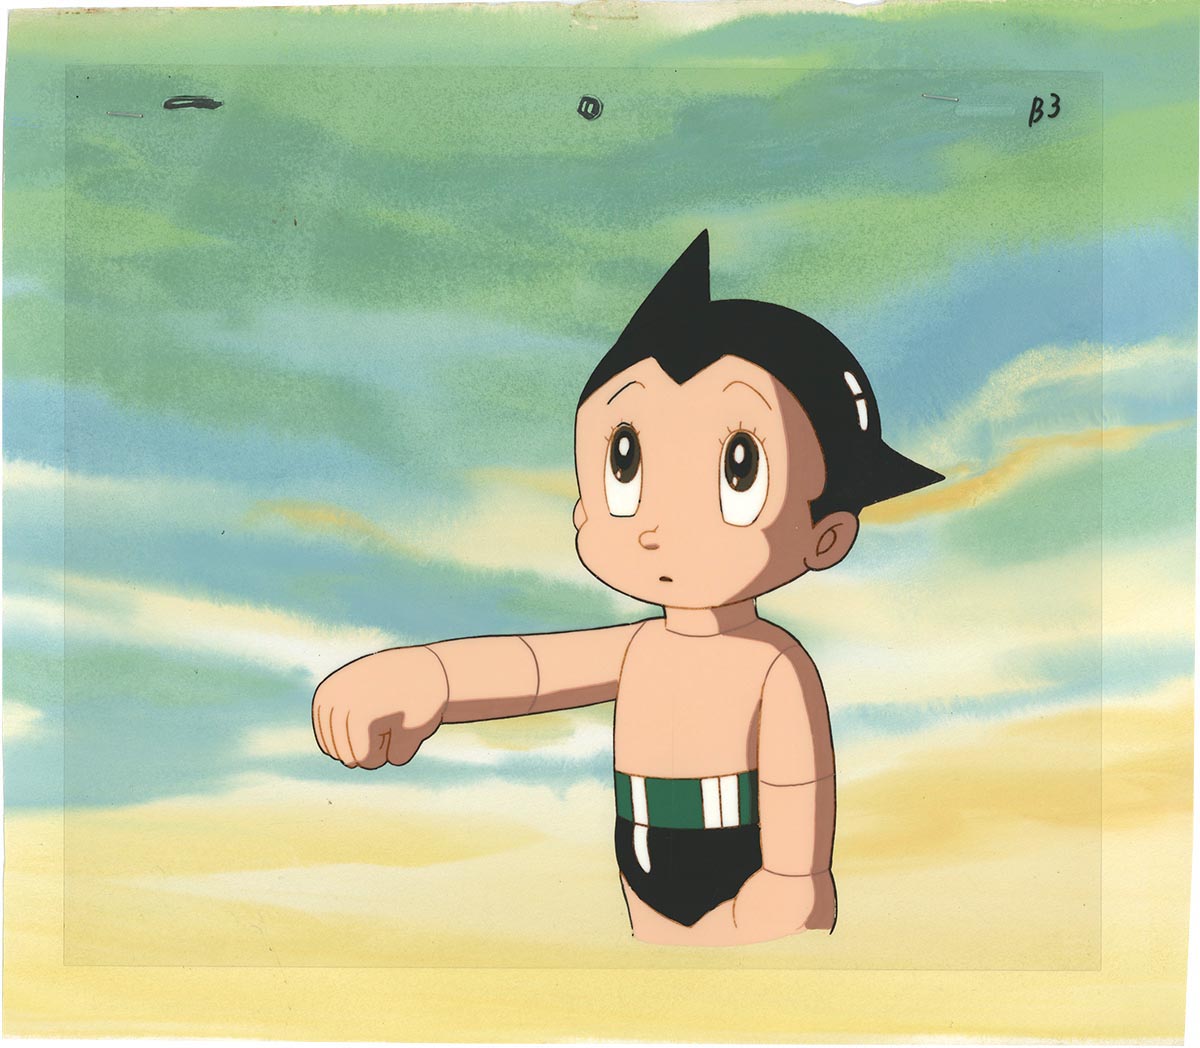 Astro Boy (2nd work) Cell